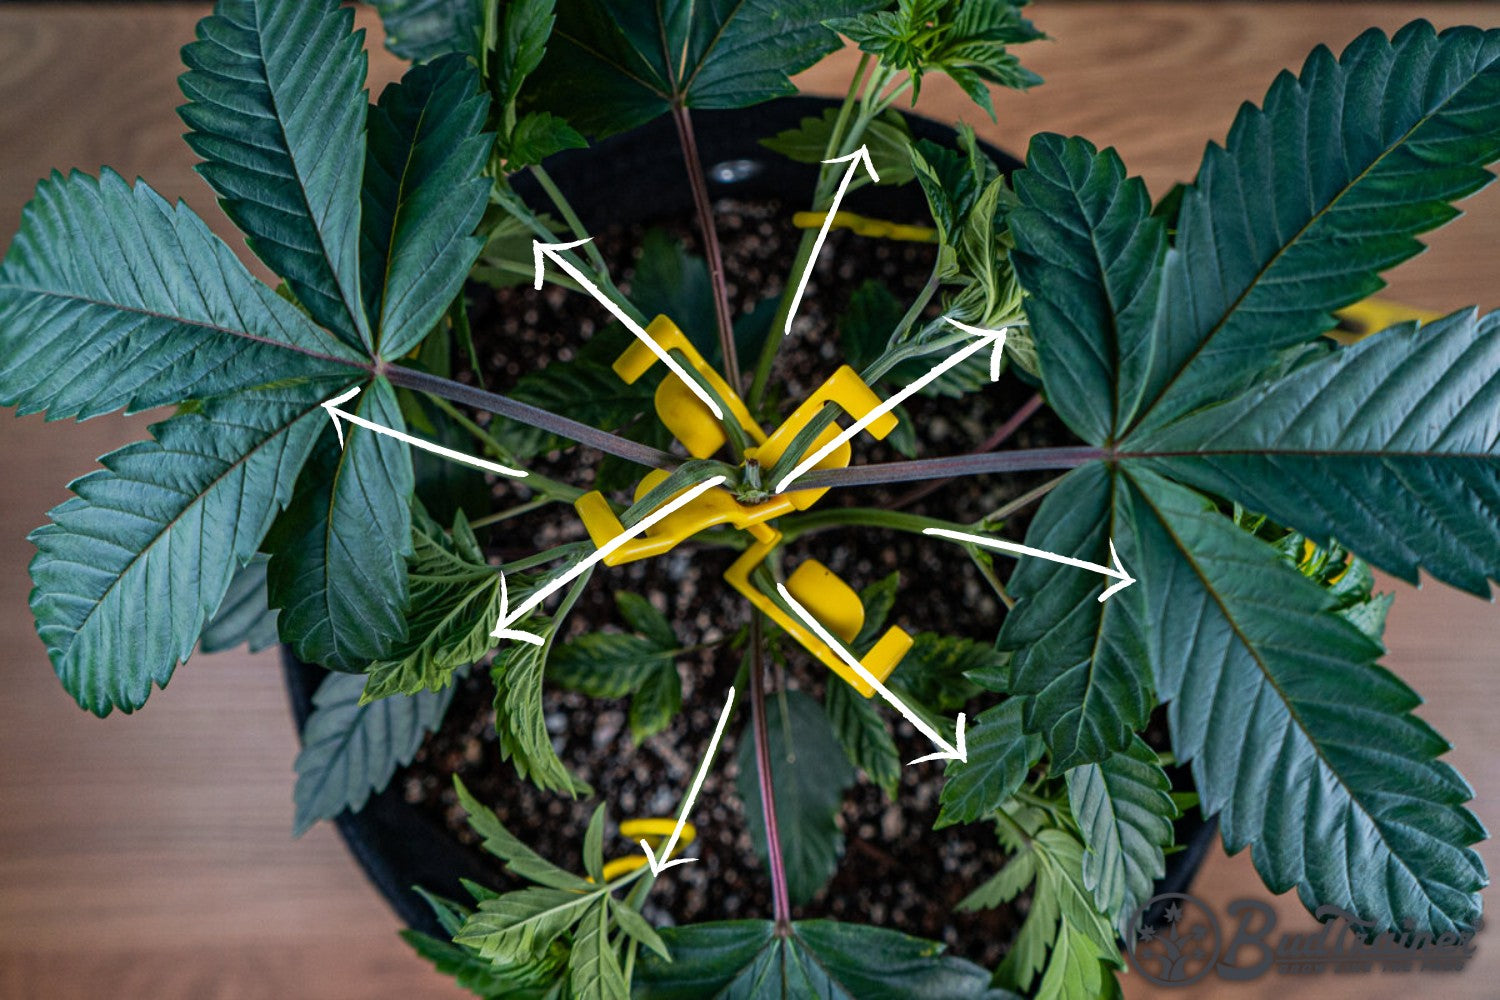 Top-down view of a cannabis plant with branches being trained outward using yellow BudClips, with arrows indicating the direction of branch spreading, and the BudTrainer logo in the bottom right corner.